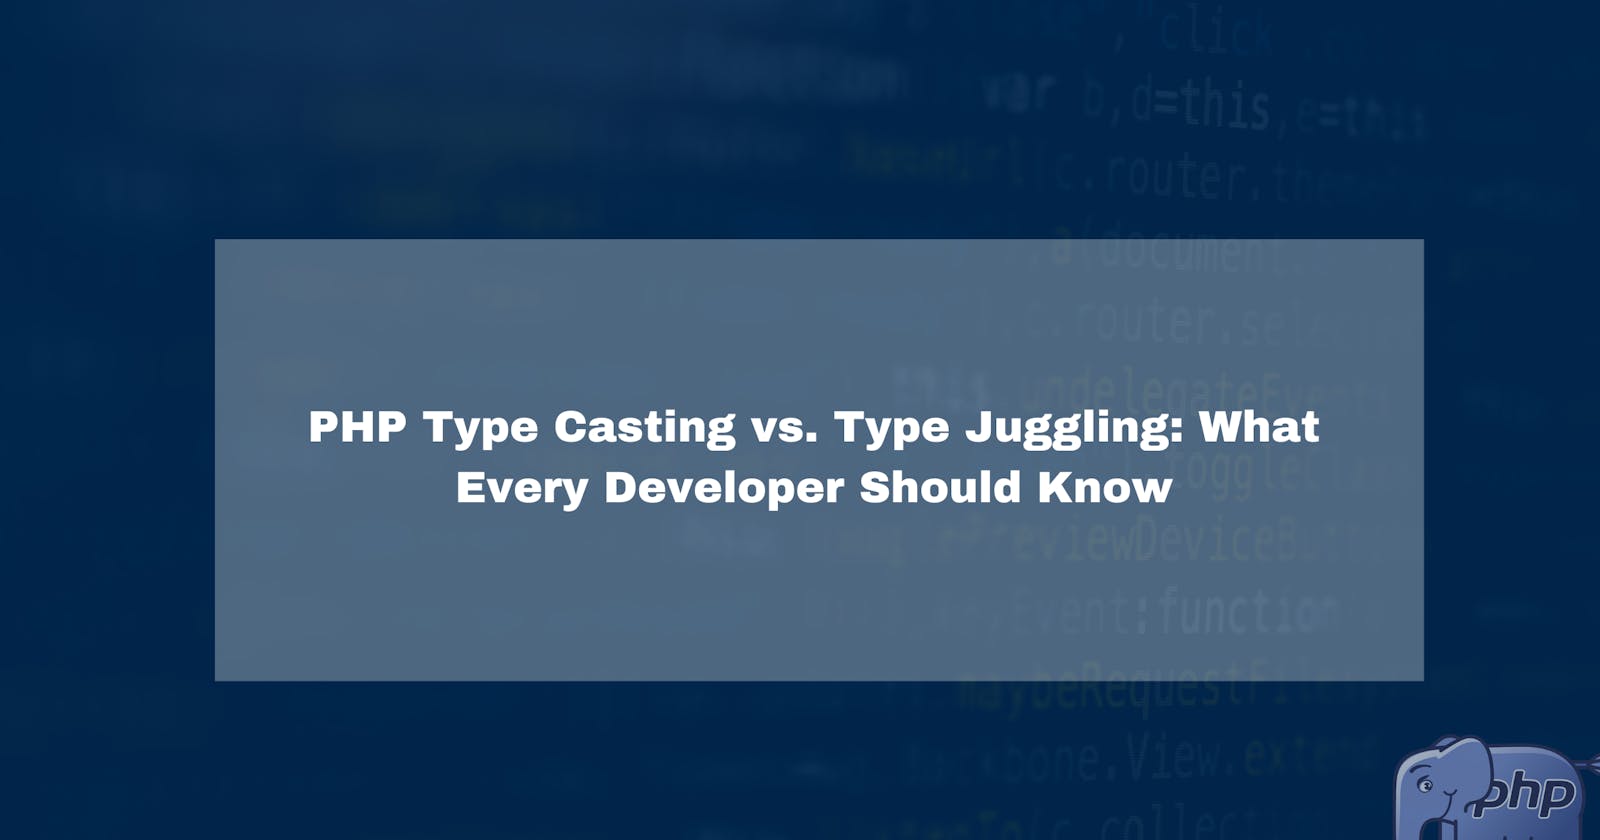 PHP Type Casting vs. Type Juggling: What Every Developer Should Know